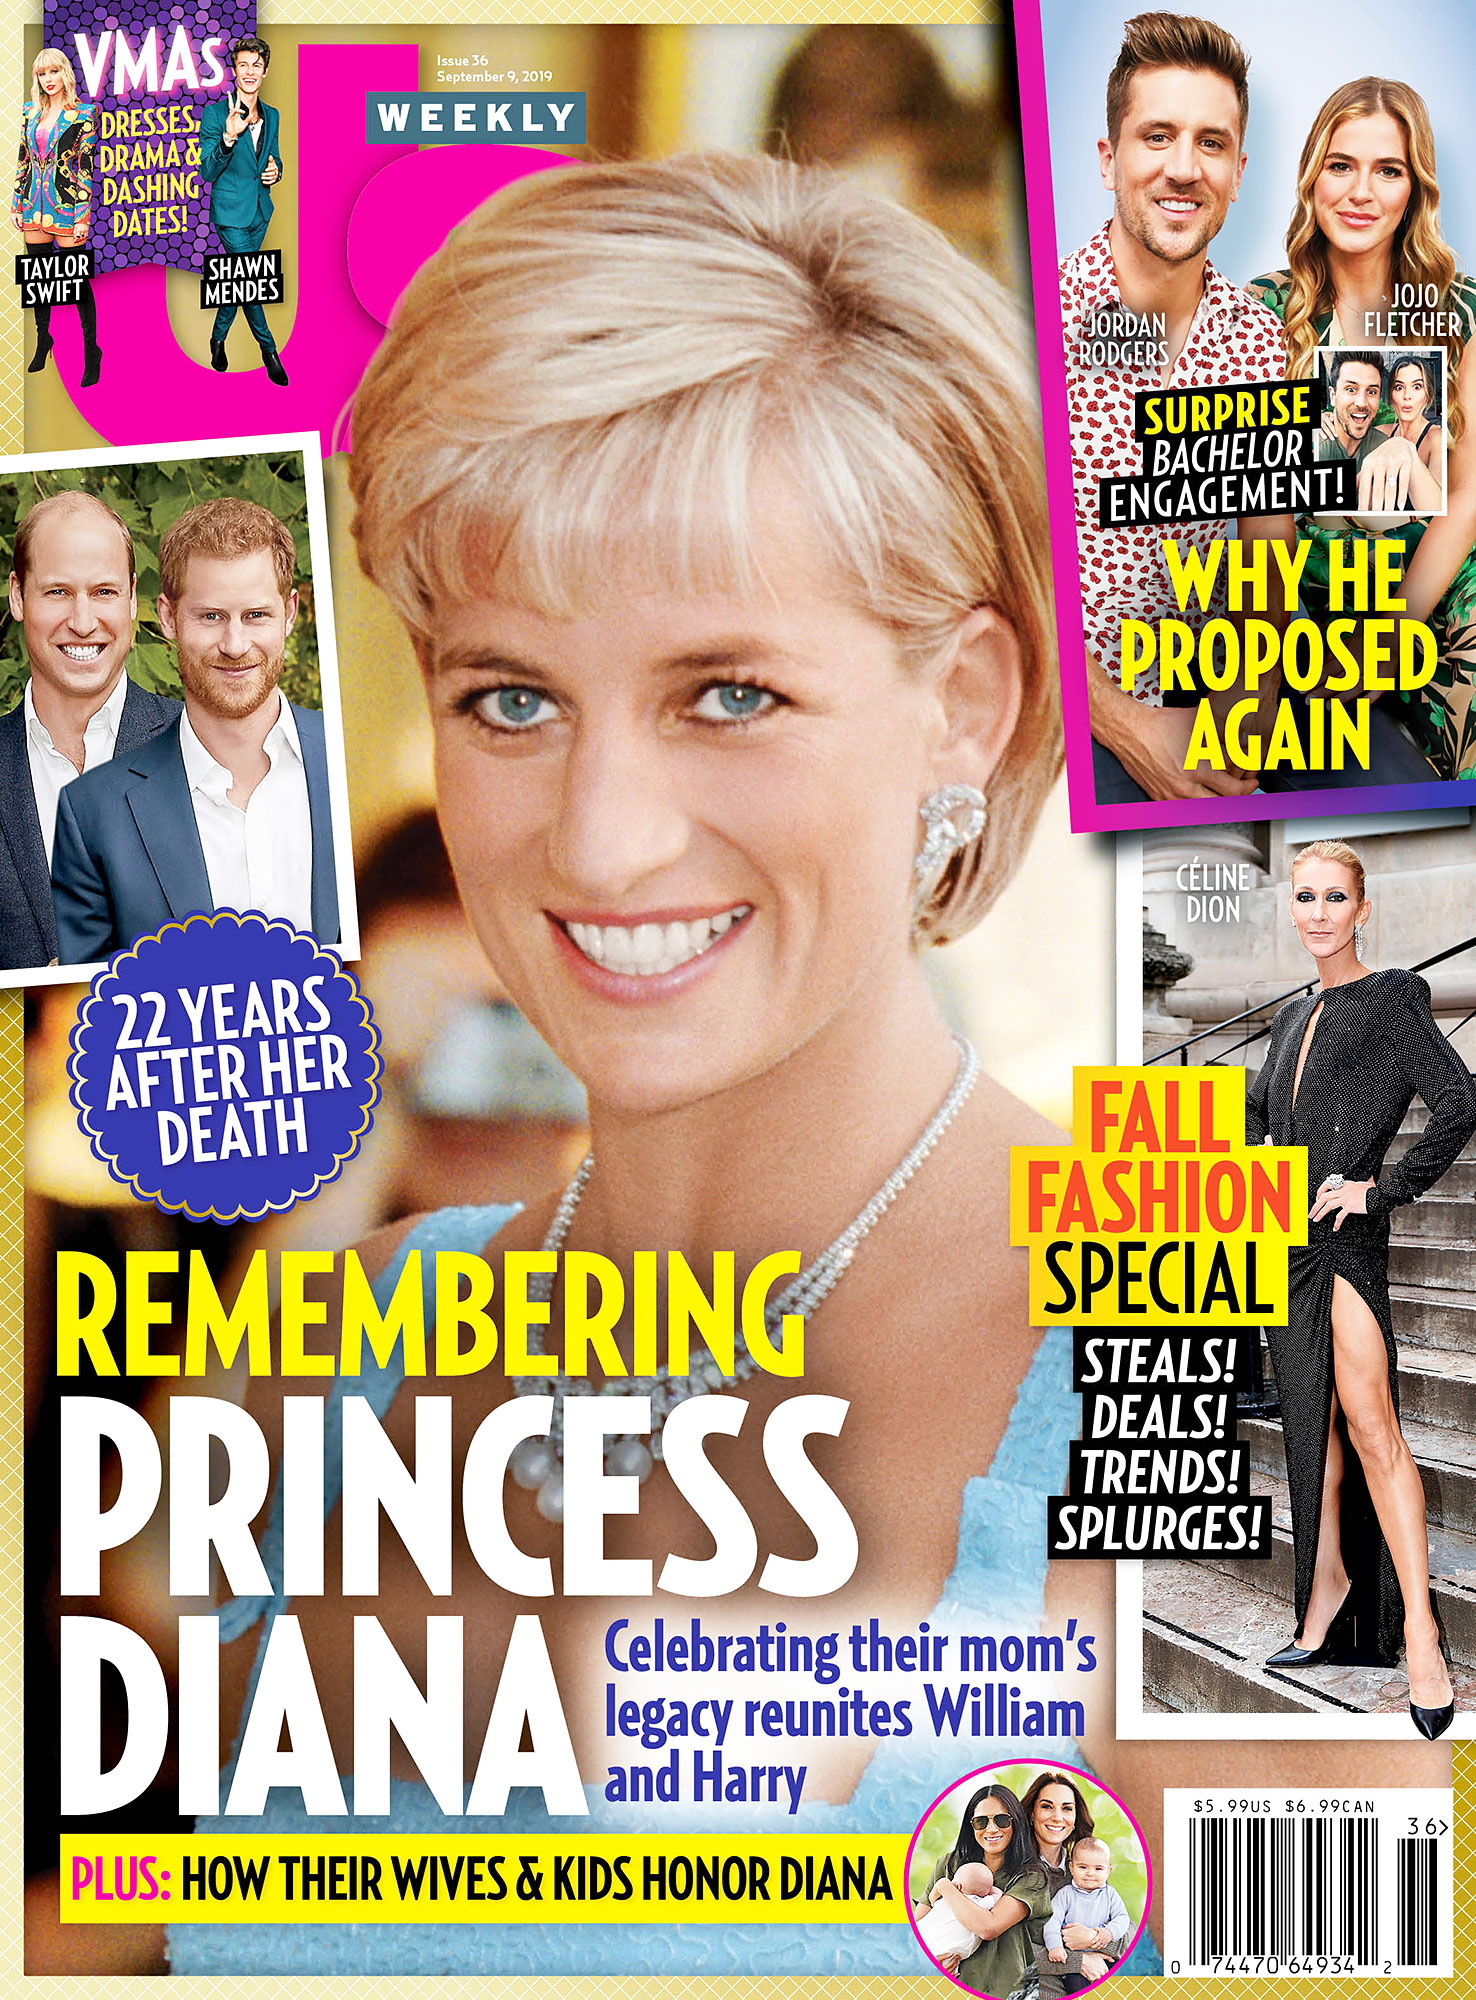 Us Weekly Issue 3619 Cover Remembering Princess Diana